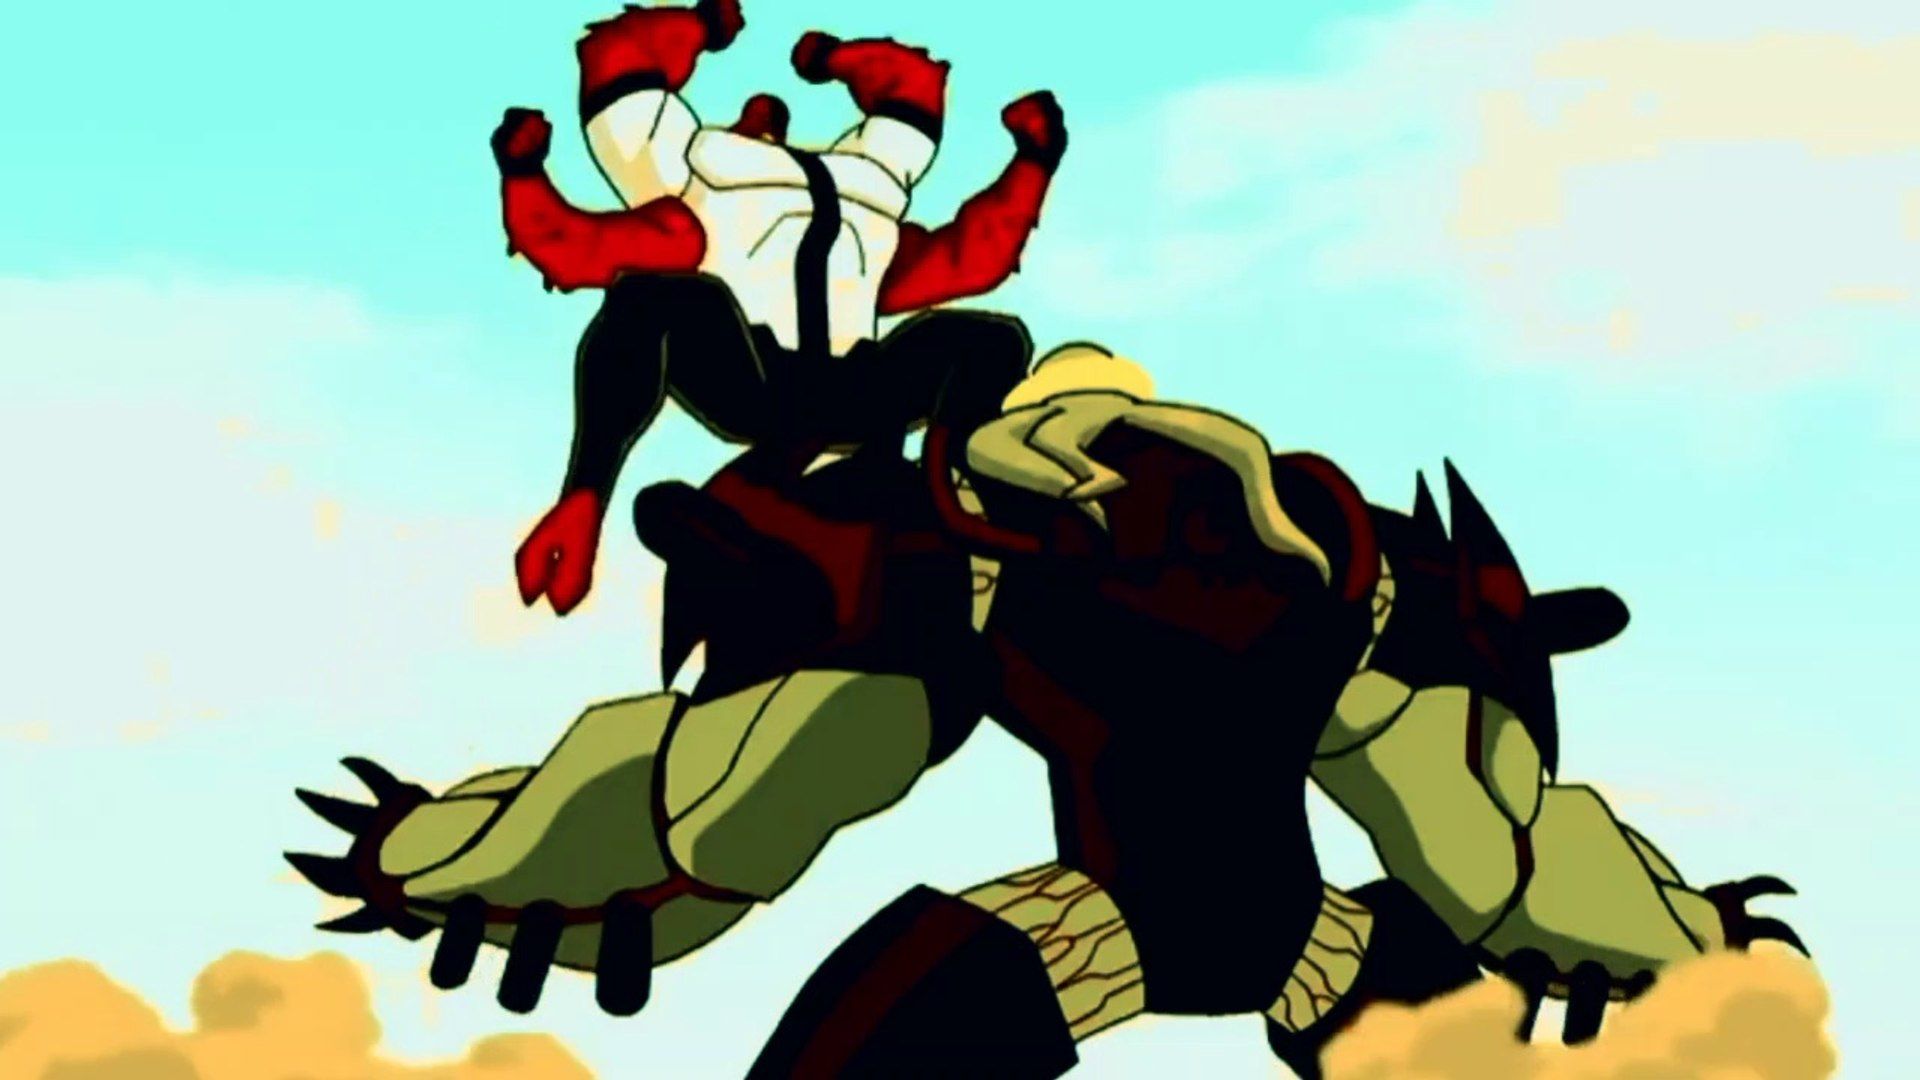 Ben10 ( Four arms vs vilgax ) ultimate fight